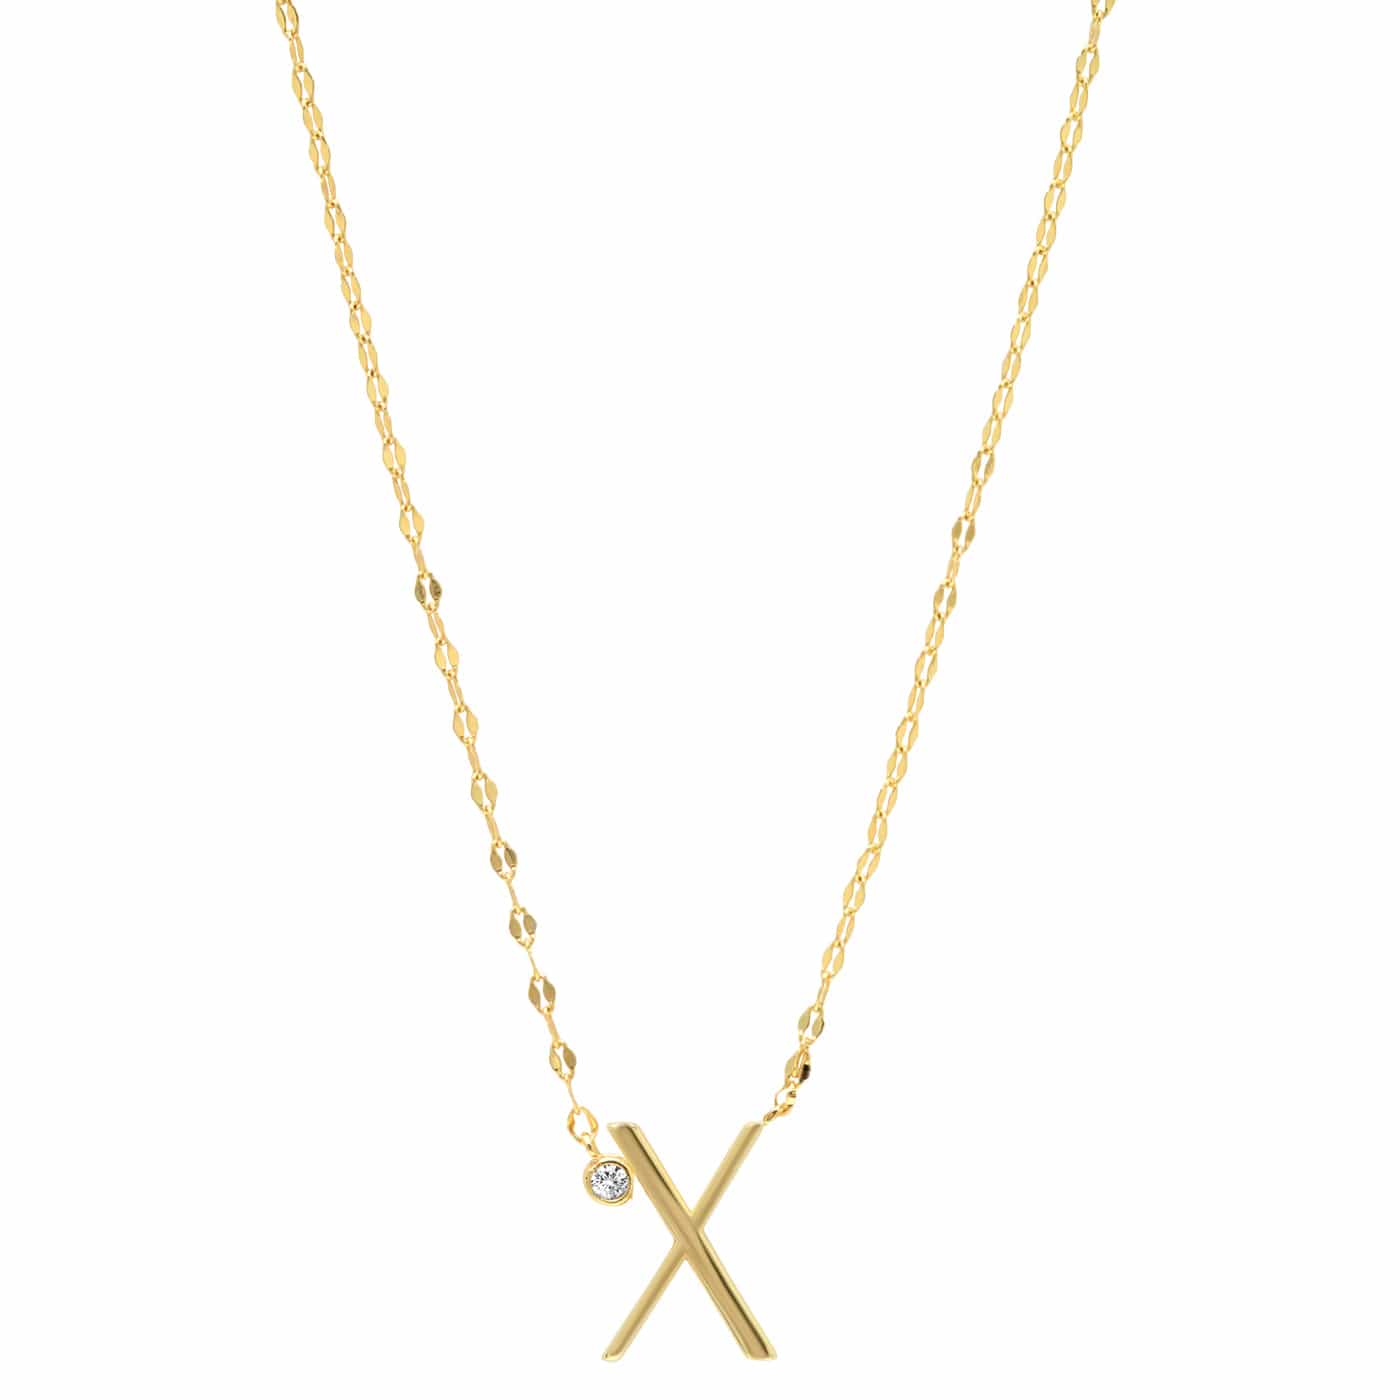 TAI JEWELRY Necklace X Medium Sized Initial Necklace With Cz Accent